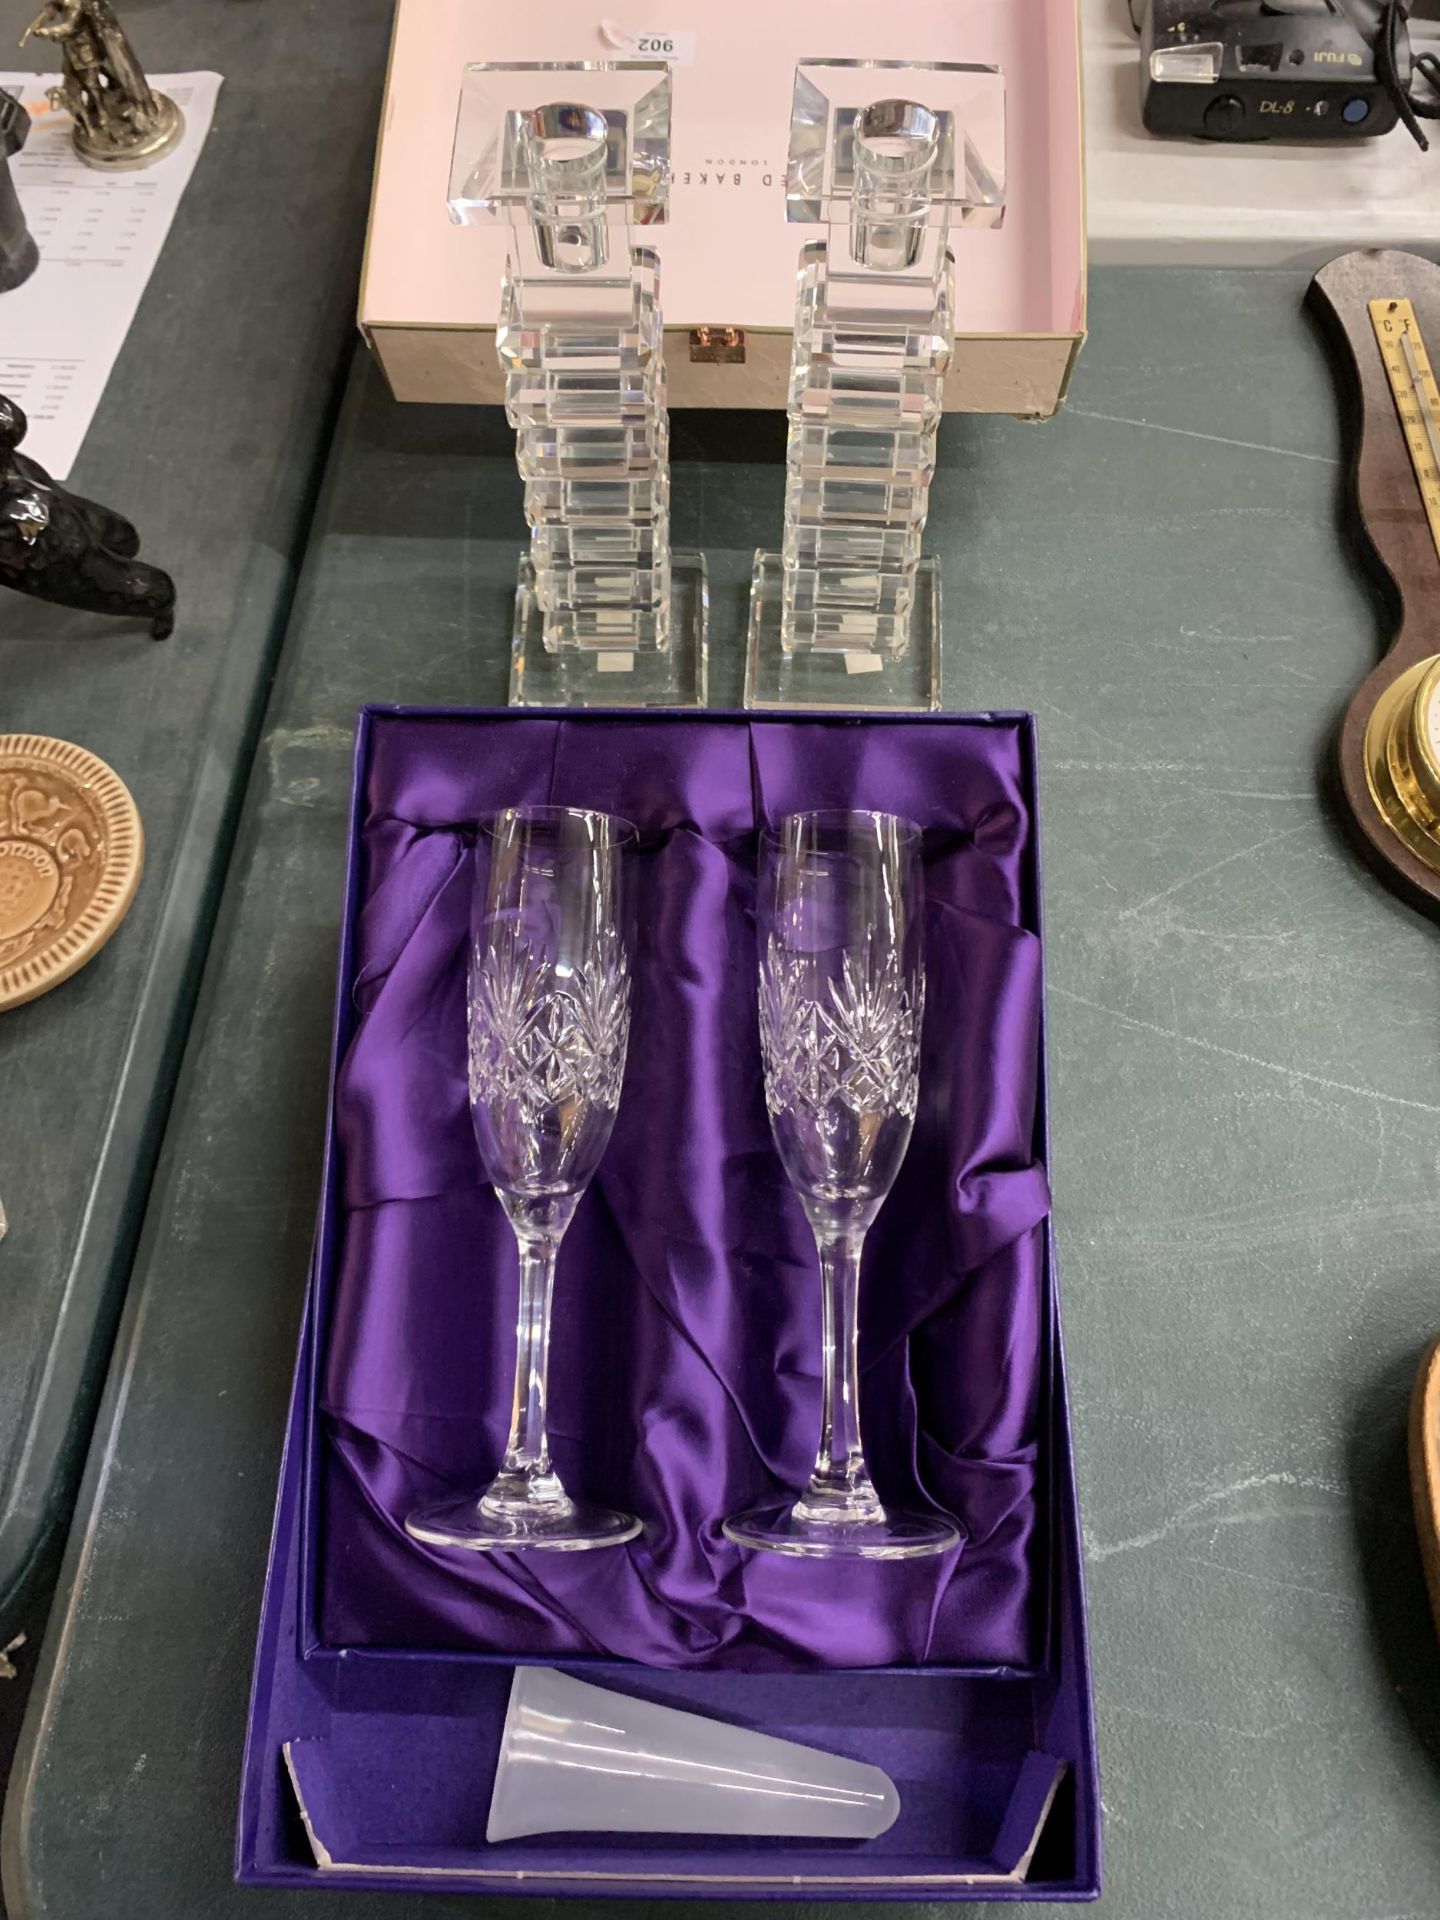 A PAIR OF BOXED EDINBURGH CRYSTAL CHAMPAGNE FLUTES PLUS A PAIR OF GALWAY CRYSTAL CANDLESTICKS